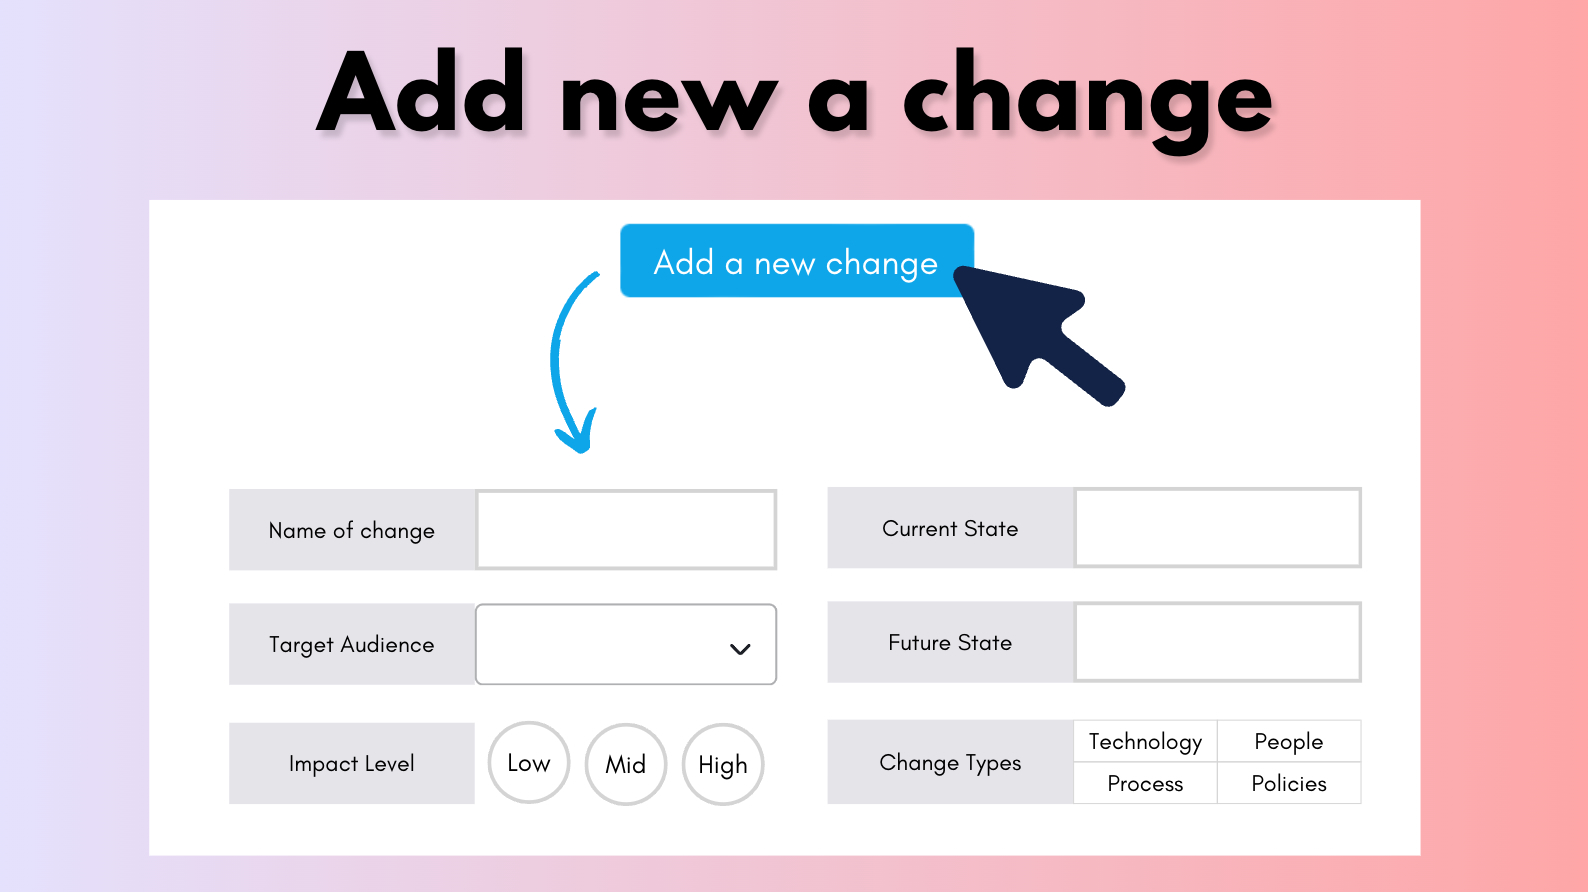 Change Impacts - Adding new project changes